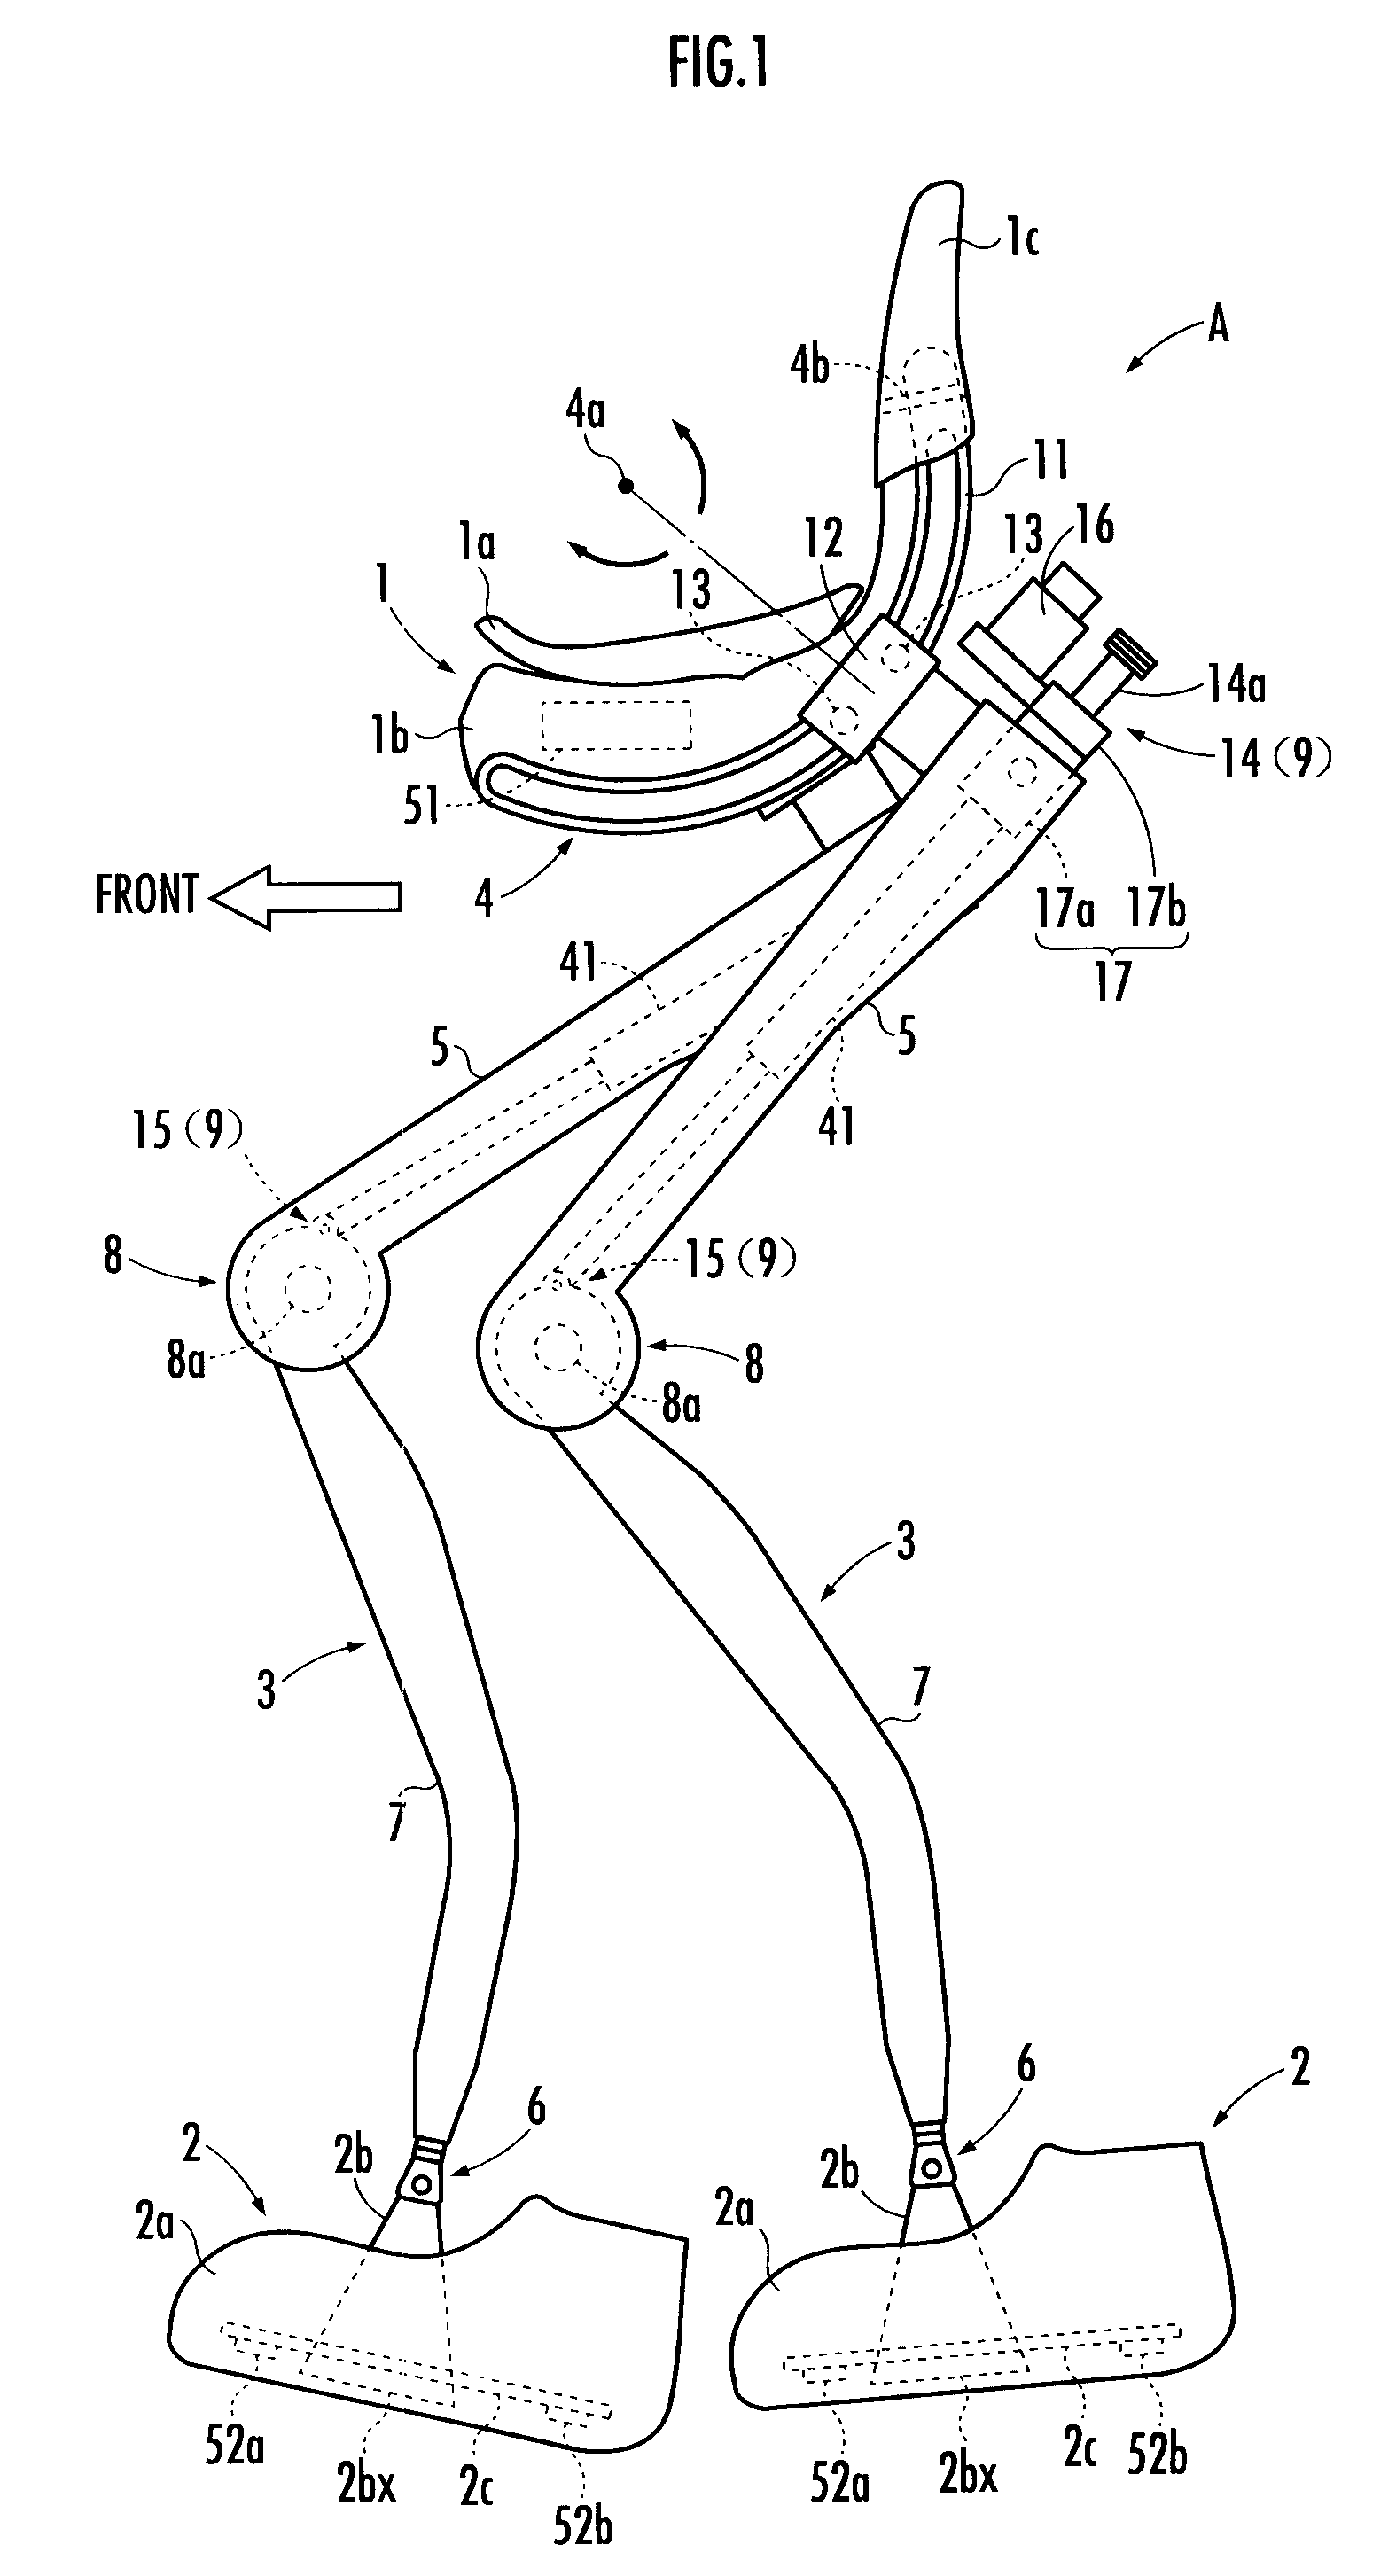 Walking assistance device and controller for the same